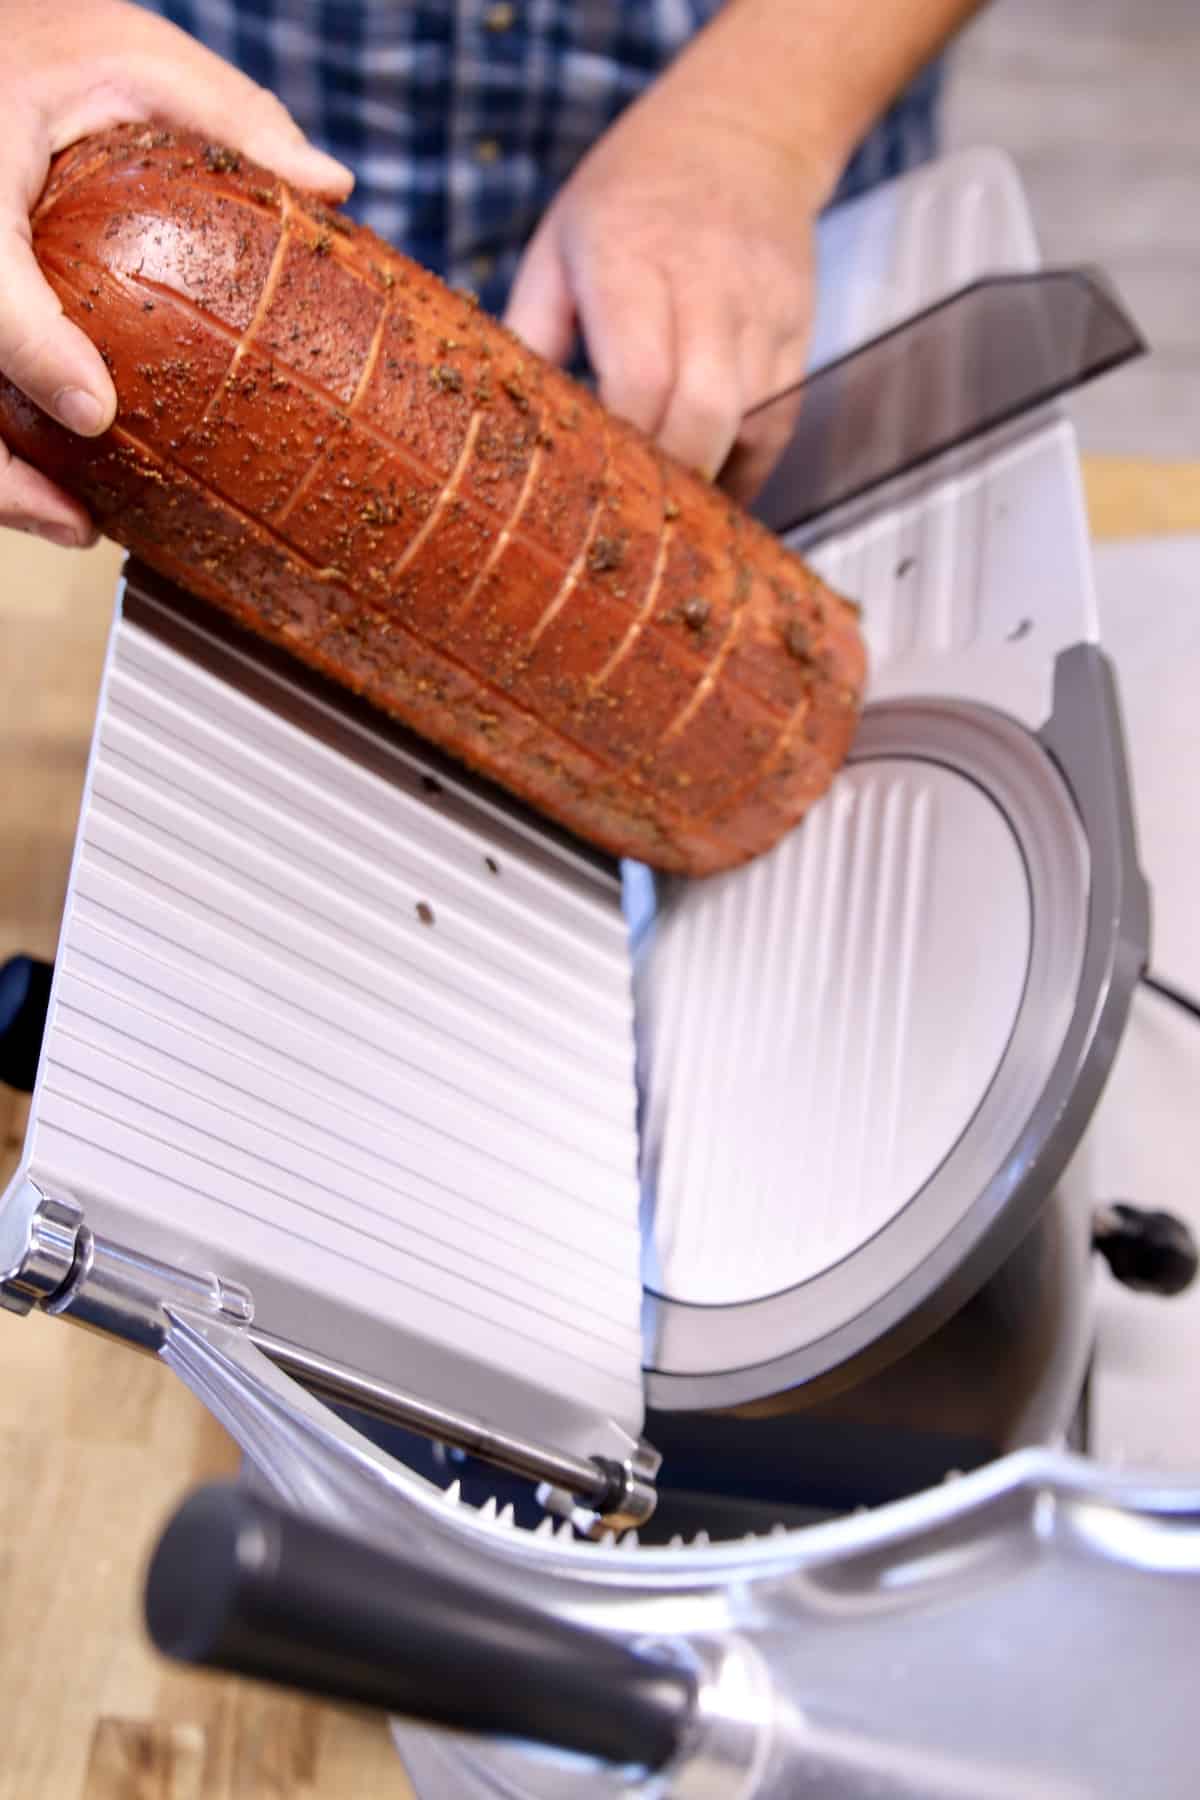 Slicing bologna with a meat slicer.